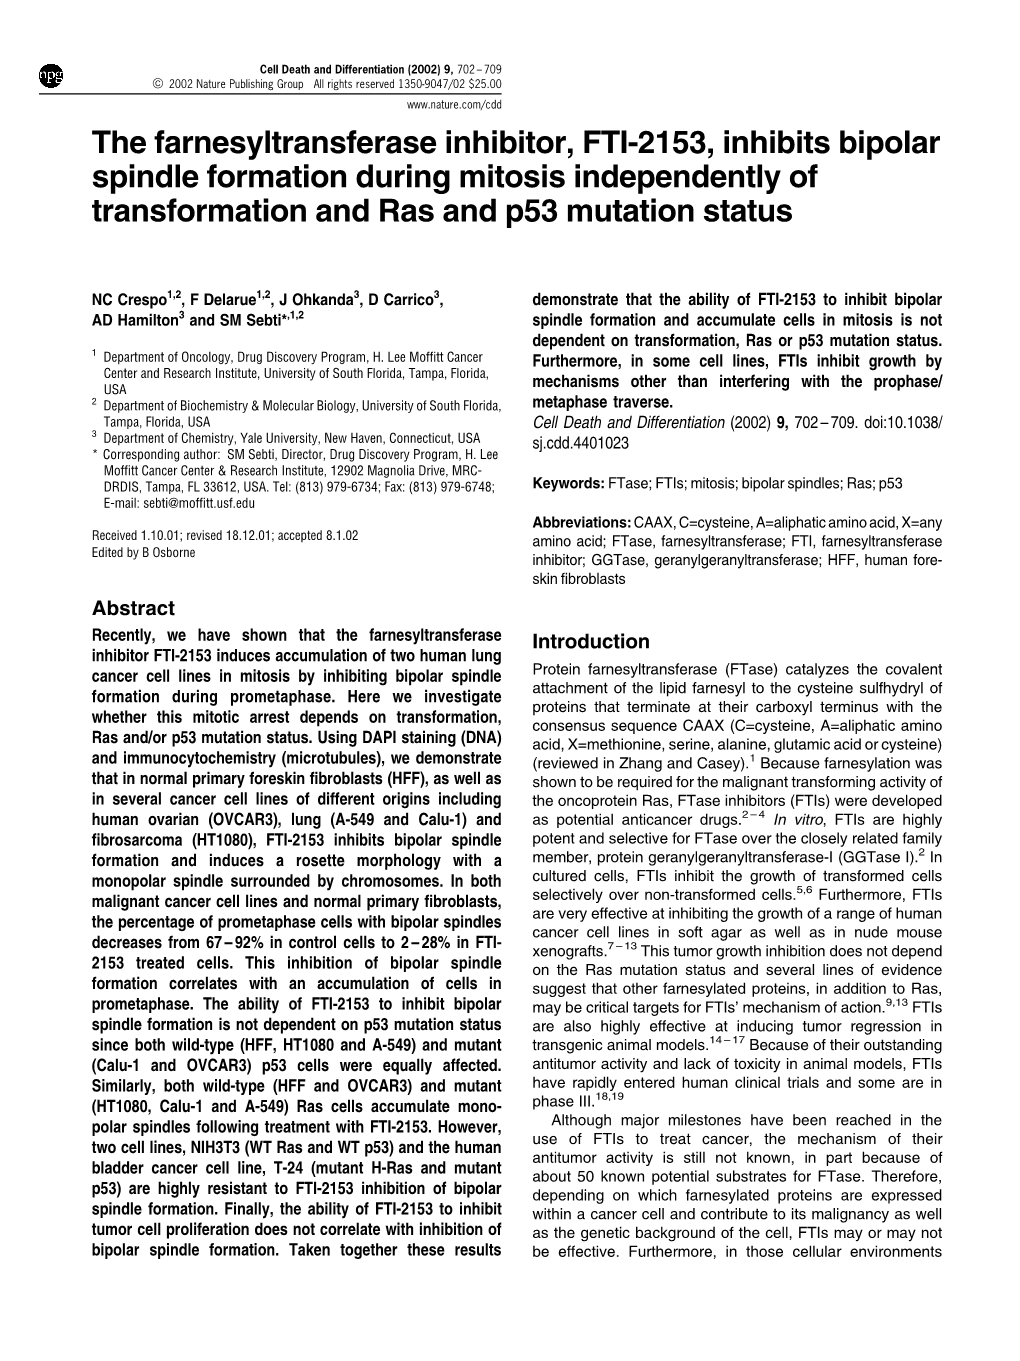 The Farnesyltransferase Inhibitor, FTI-2153, Inhibits Bipolar Spindle Formation During Mitosis Independently of Transformation and Ras and P53 Mutation Status